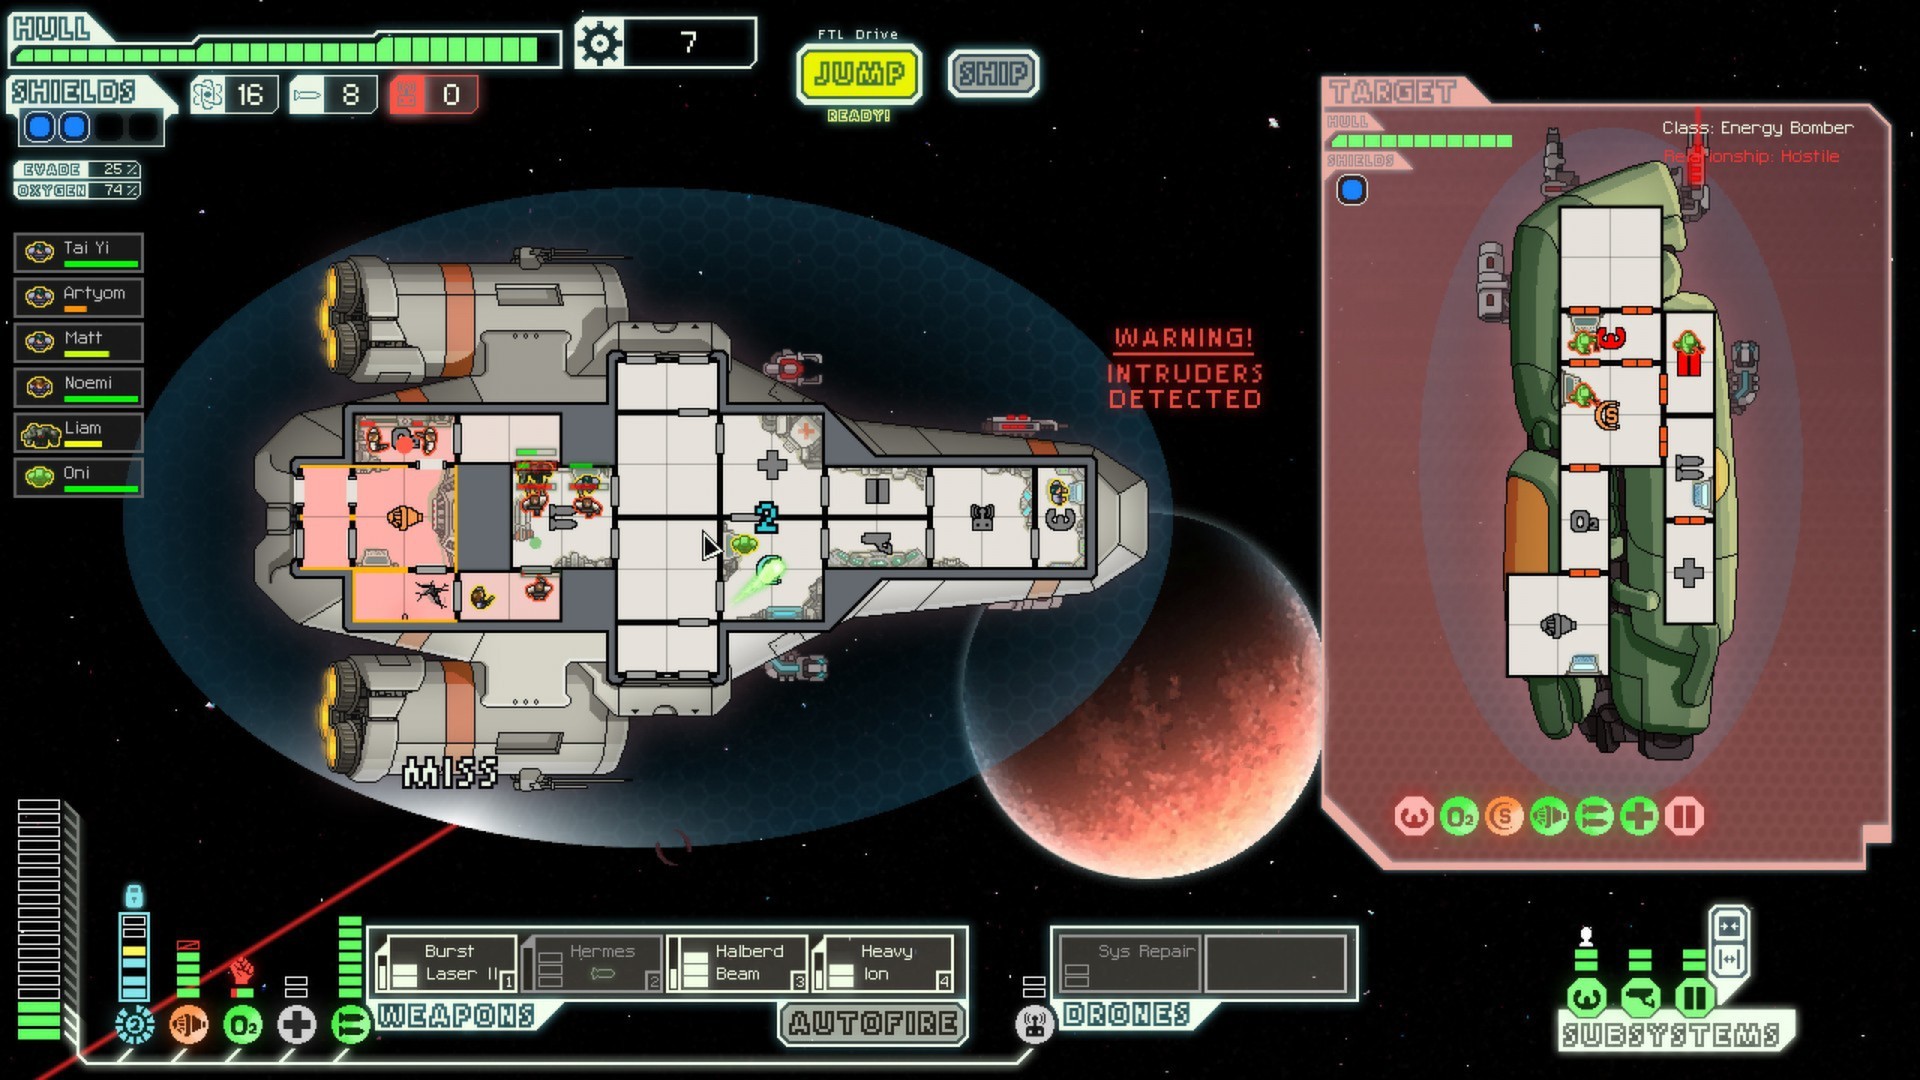 Best mobile strategy games: FTL: Faster Than Light. Image shows he schematics of a spaceship.